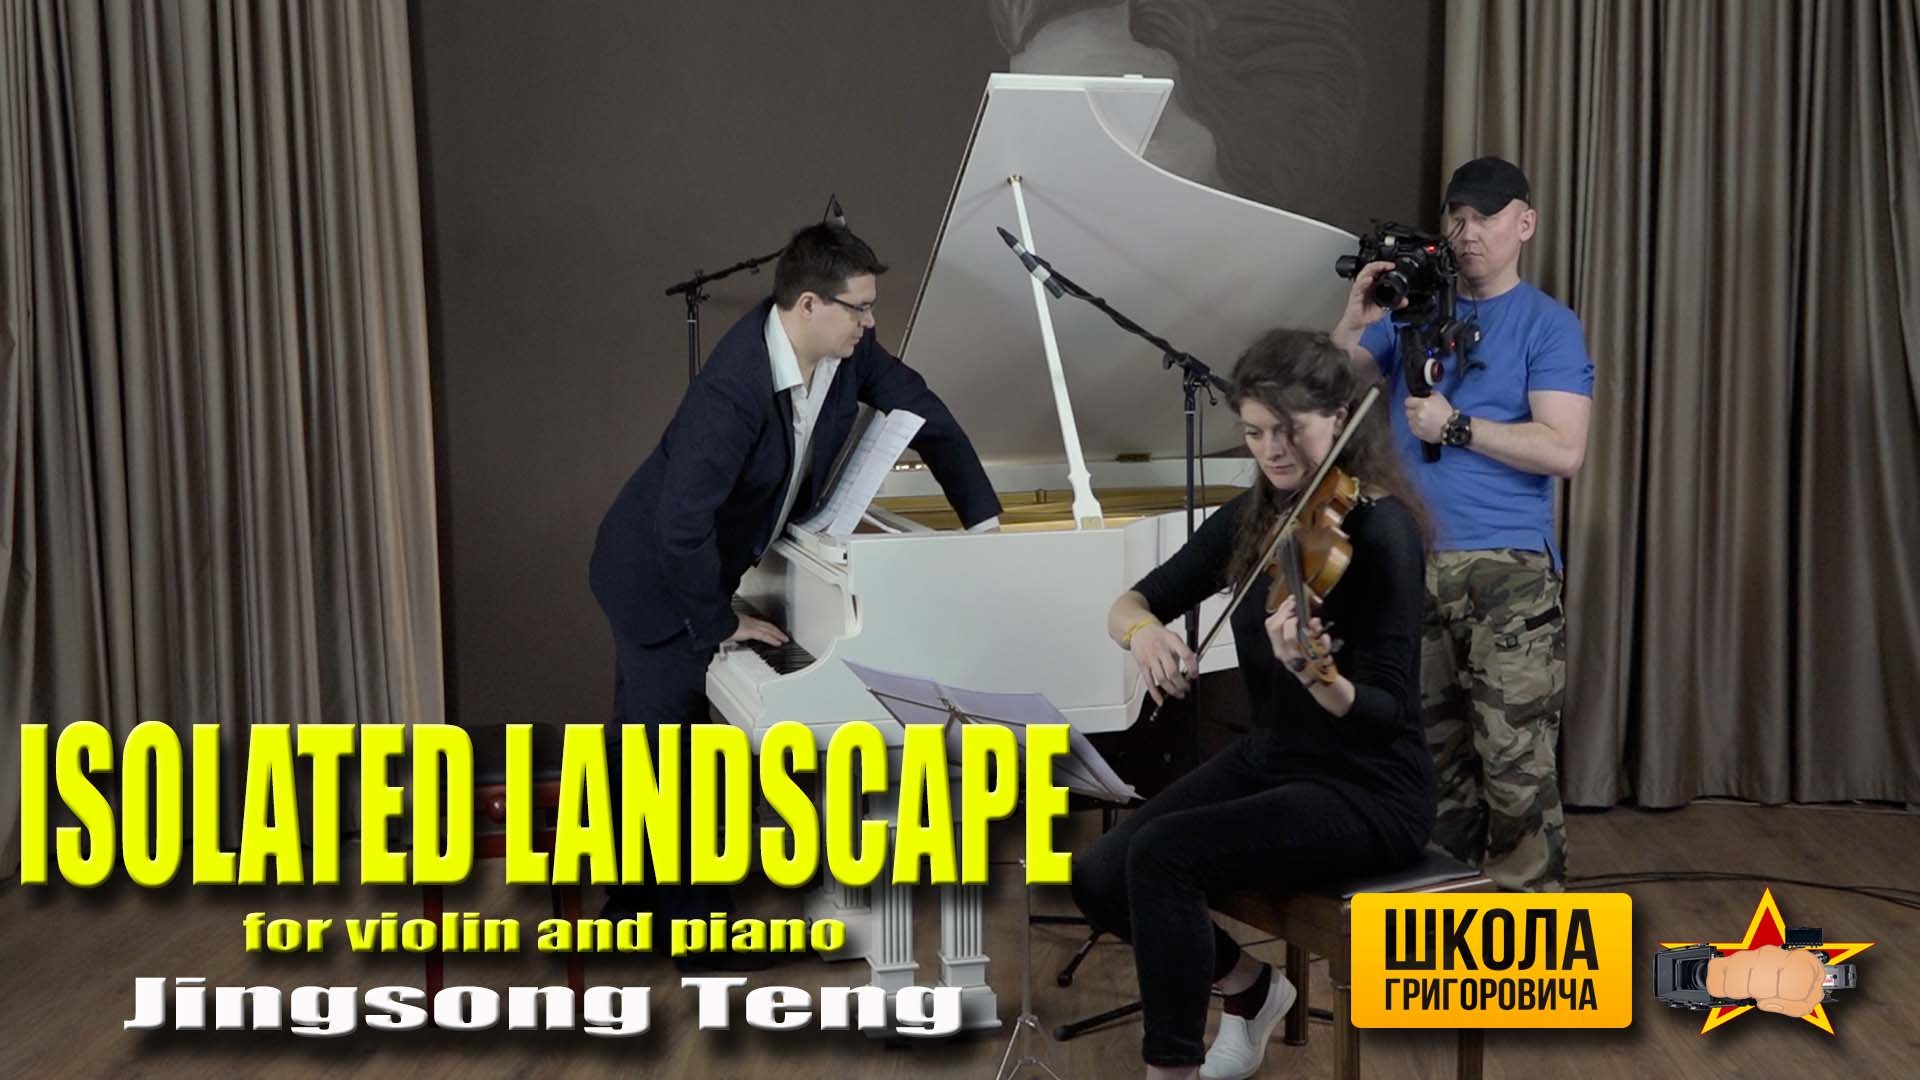 JINGSONG TENG - ISOLATED LANDSCAPE - for Violin and Piano. СПб, март 2023 #denvideomaker